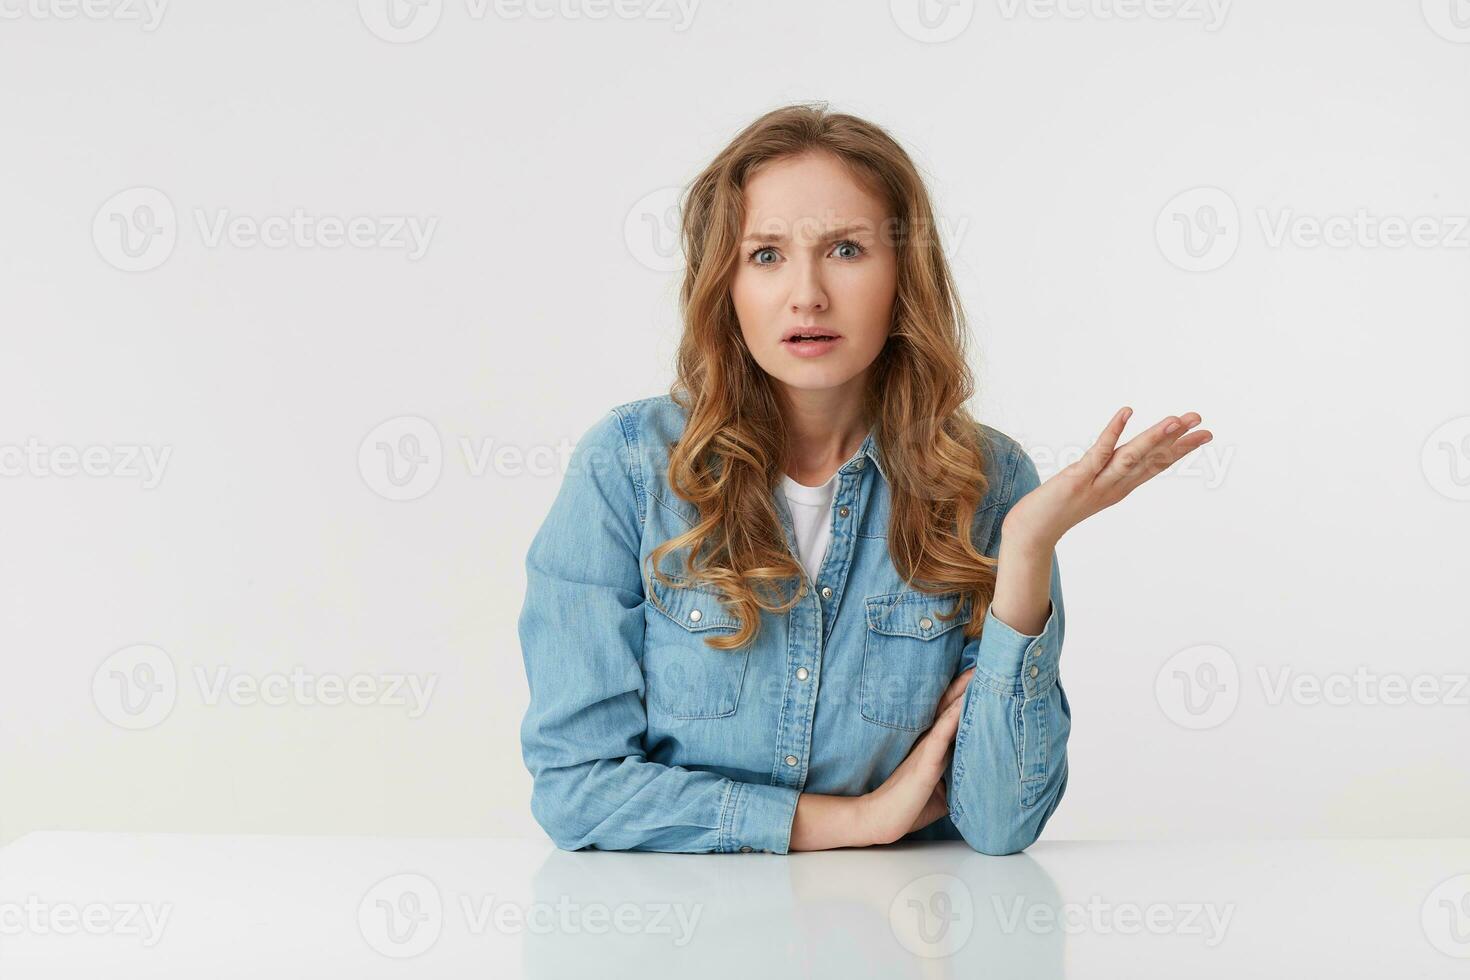 Portrait of confused young woman with long blond wavy hair, sitting at the table, one palm raised, looks skeptically displeased indignantly with incomprehension, over white background. photo